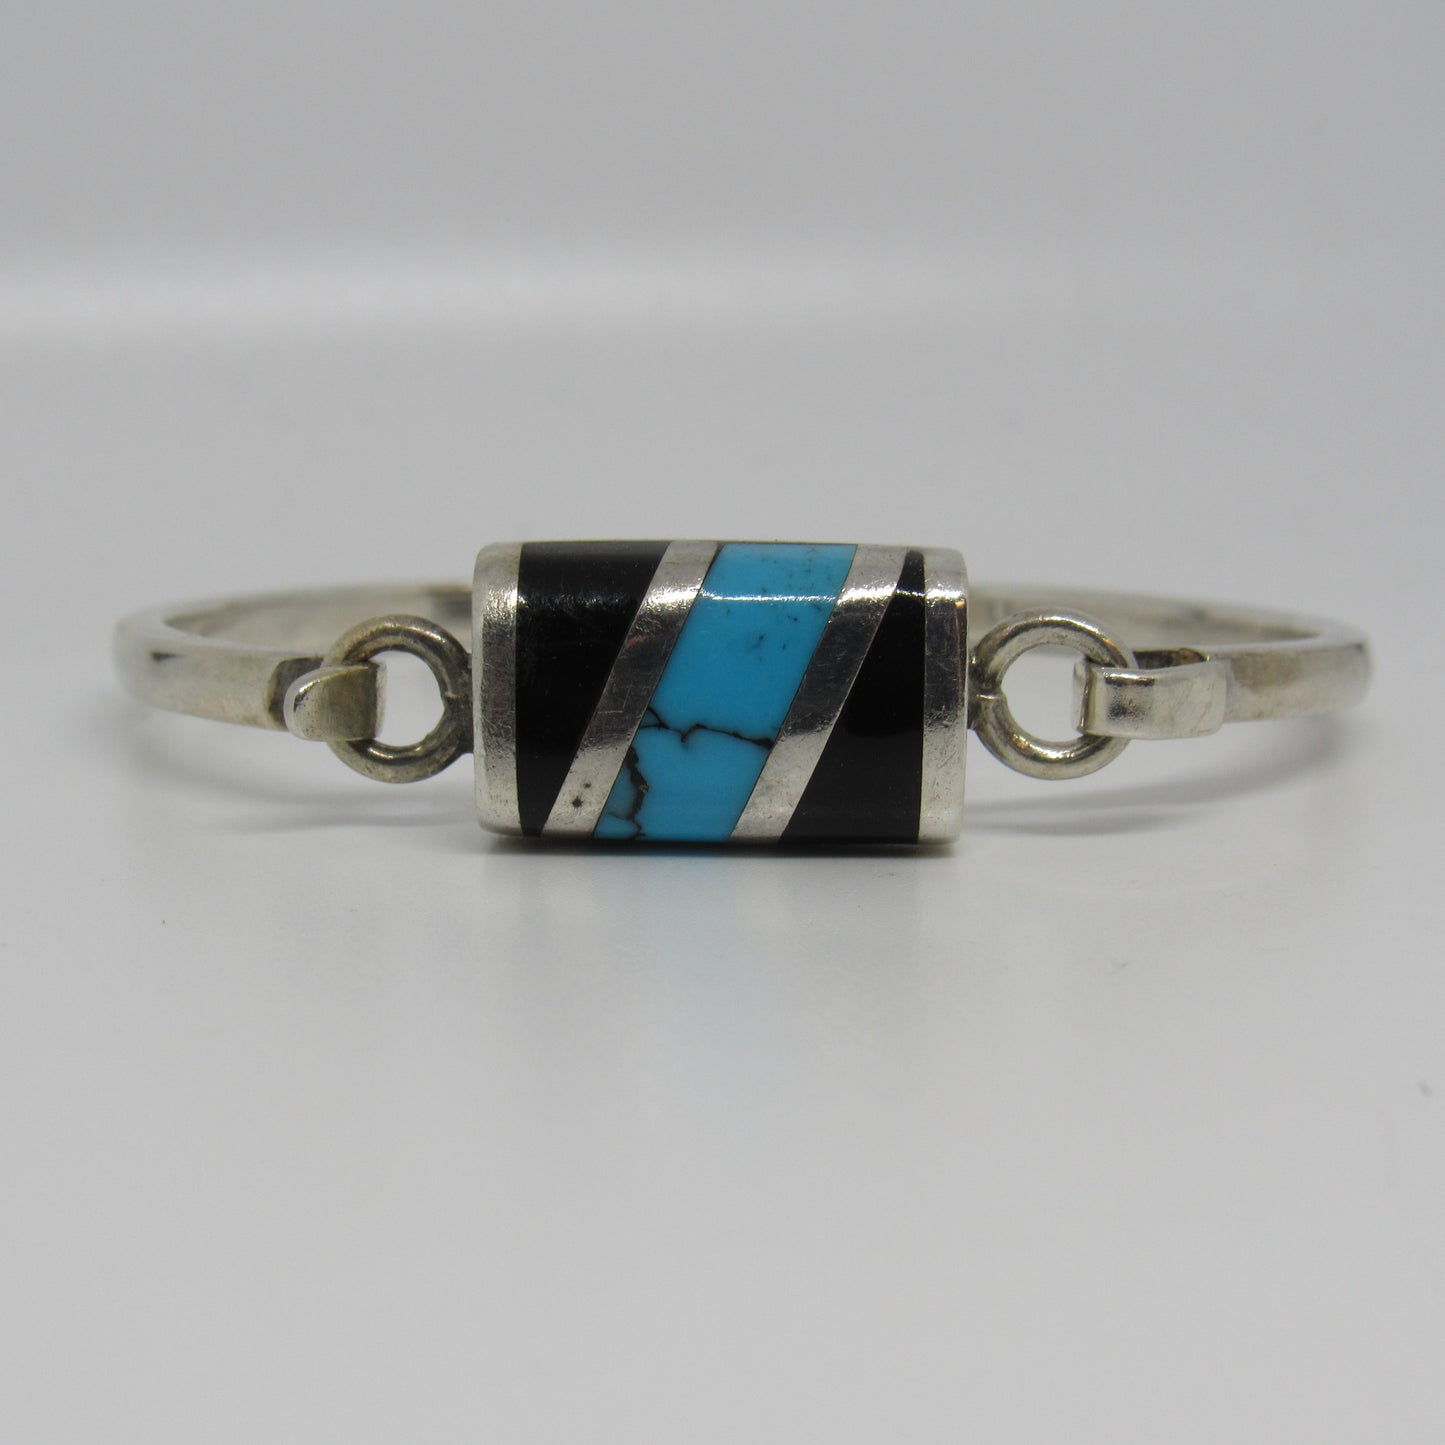 Vintage Sterling Silver 925 Mexico TC-30 Turquoise Onyx Bangle Bracelet - 7 inch